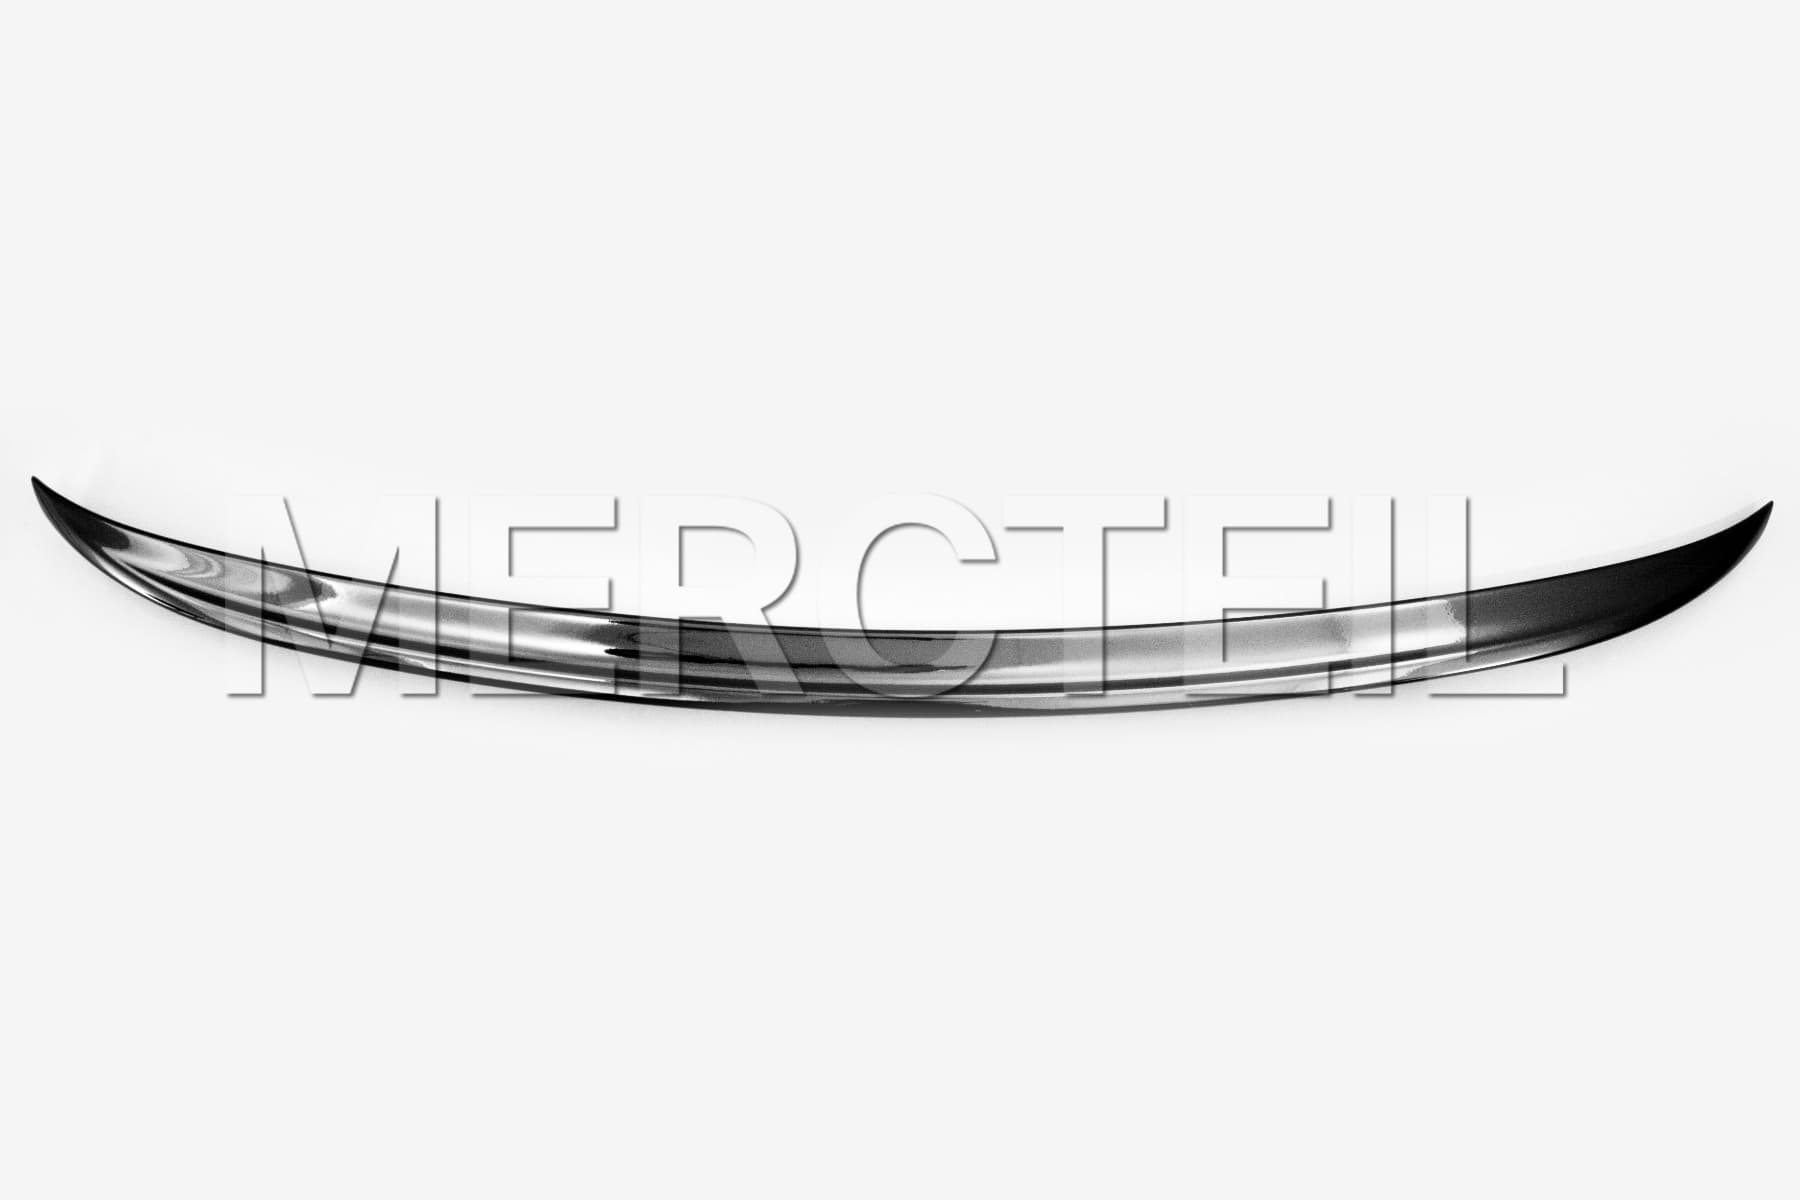 SL Class Spoiler R230 Genuine Mercedes AMG (part number: A23079000883541)